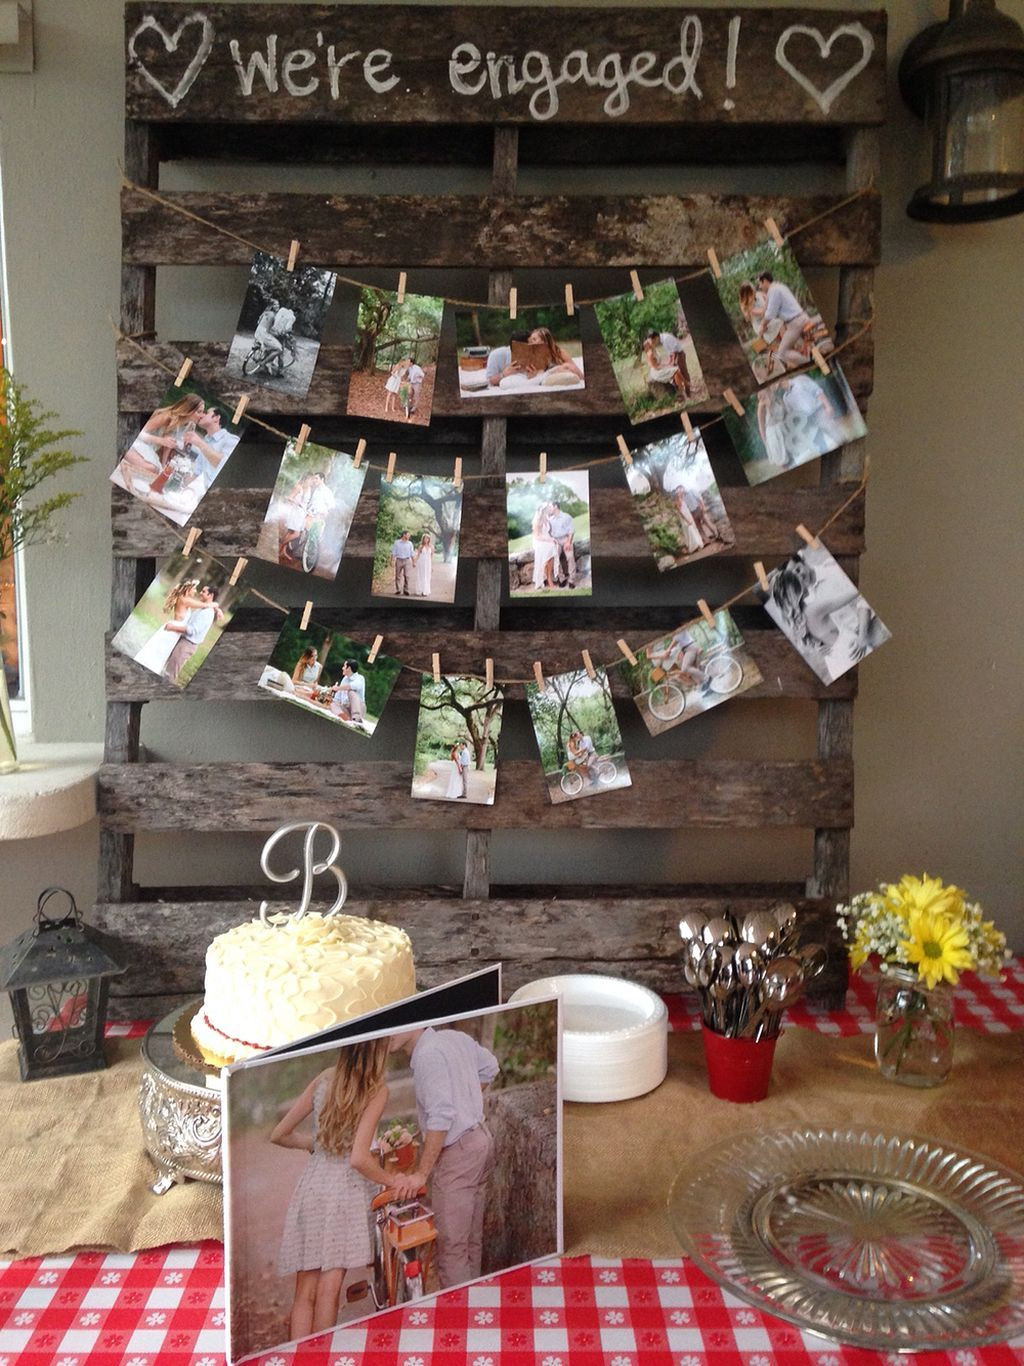 Ideas To Decorate Backyard For Engagement Party
 Tips for Looking Your Best on Your Wedding Day